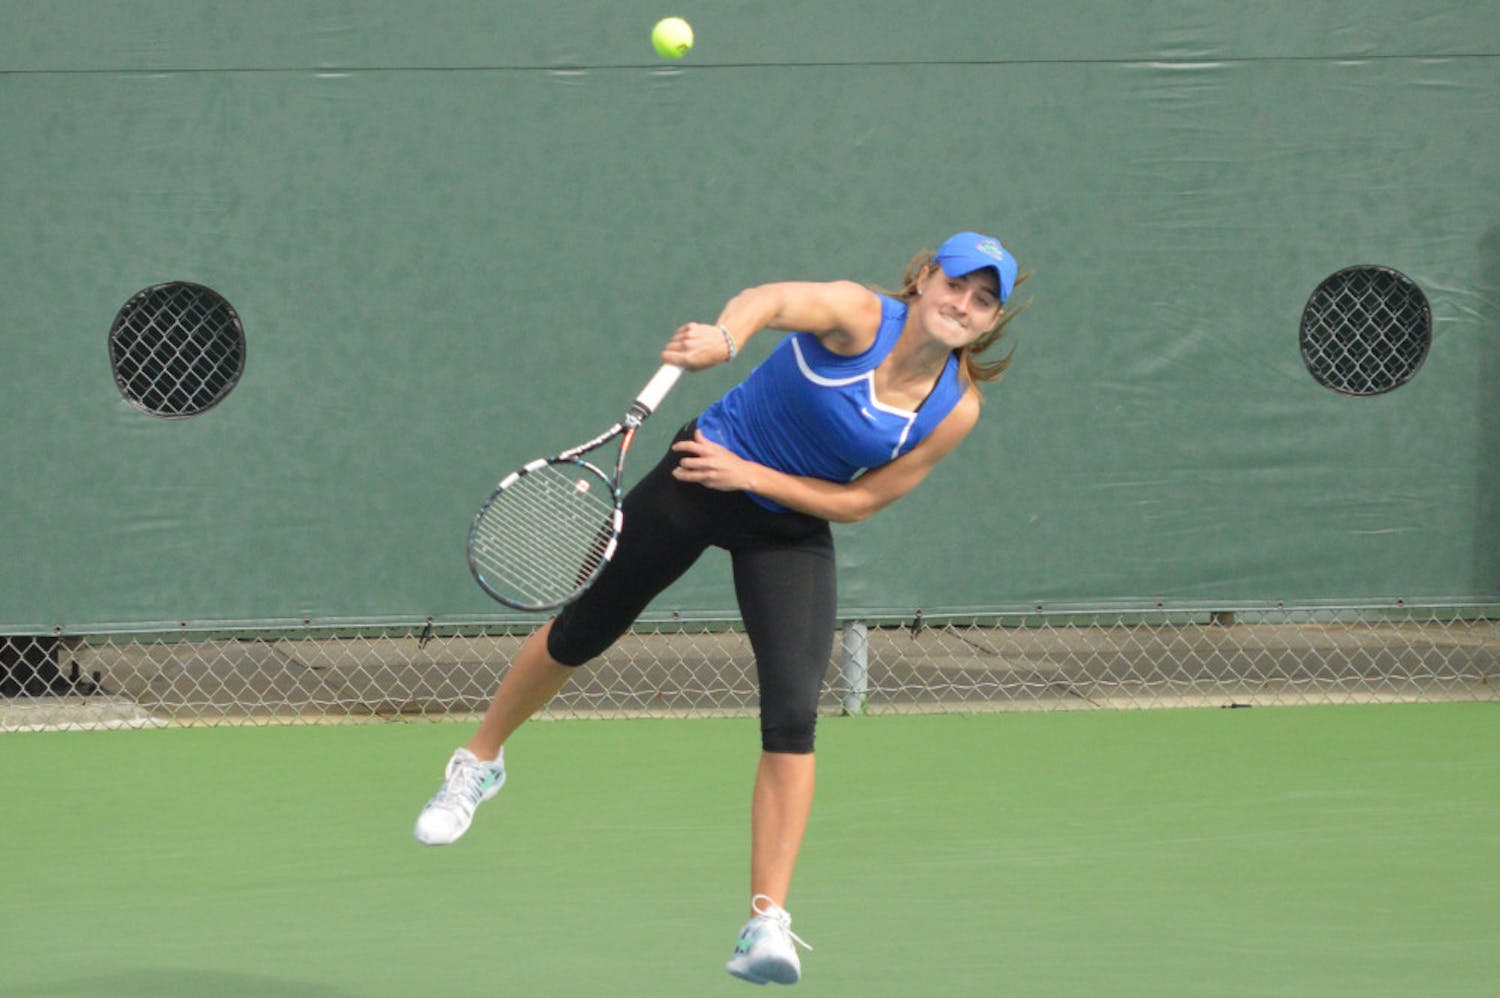 Kourtney Keegan serves the ball during her doubles match in Florida's 4-0 win against Louisville on Saturday.